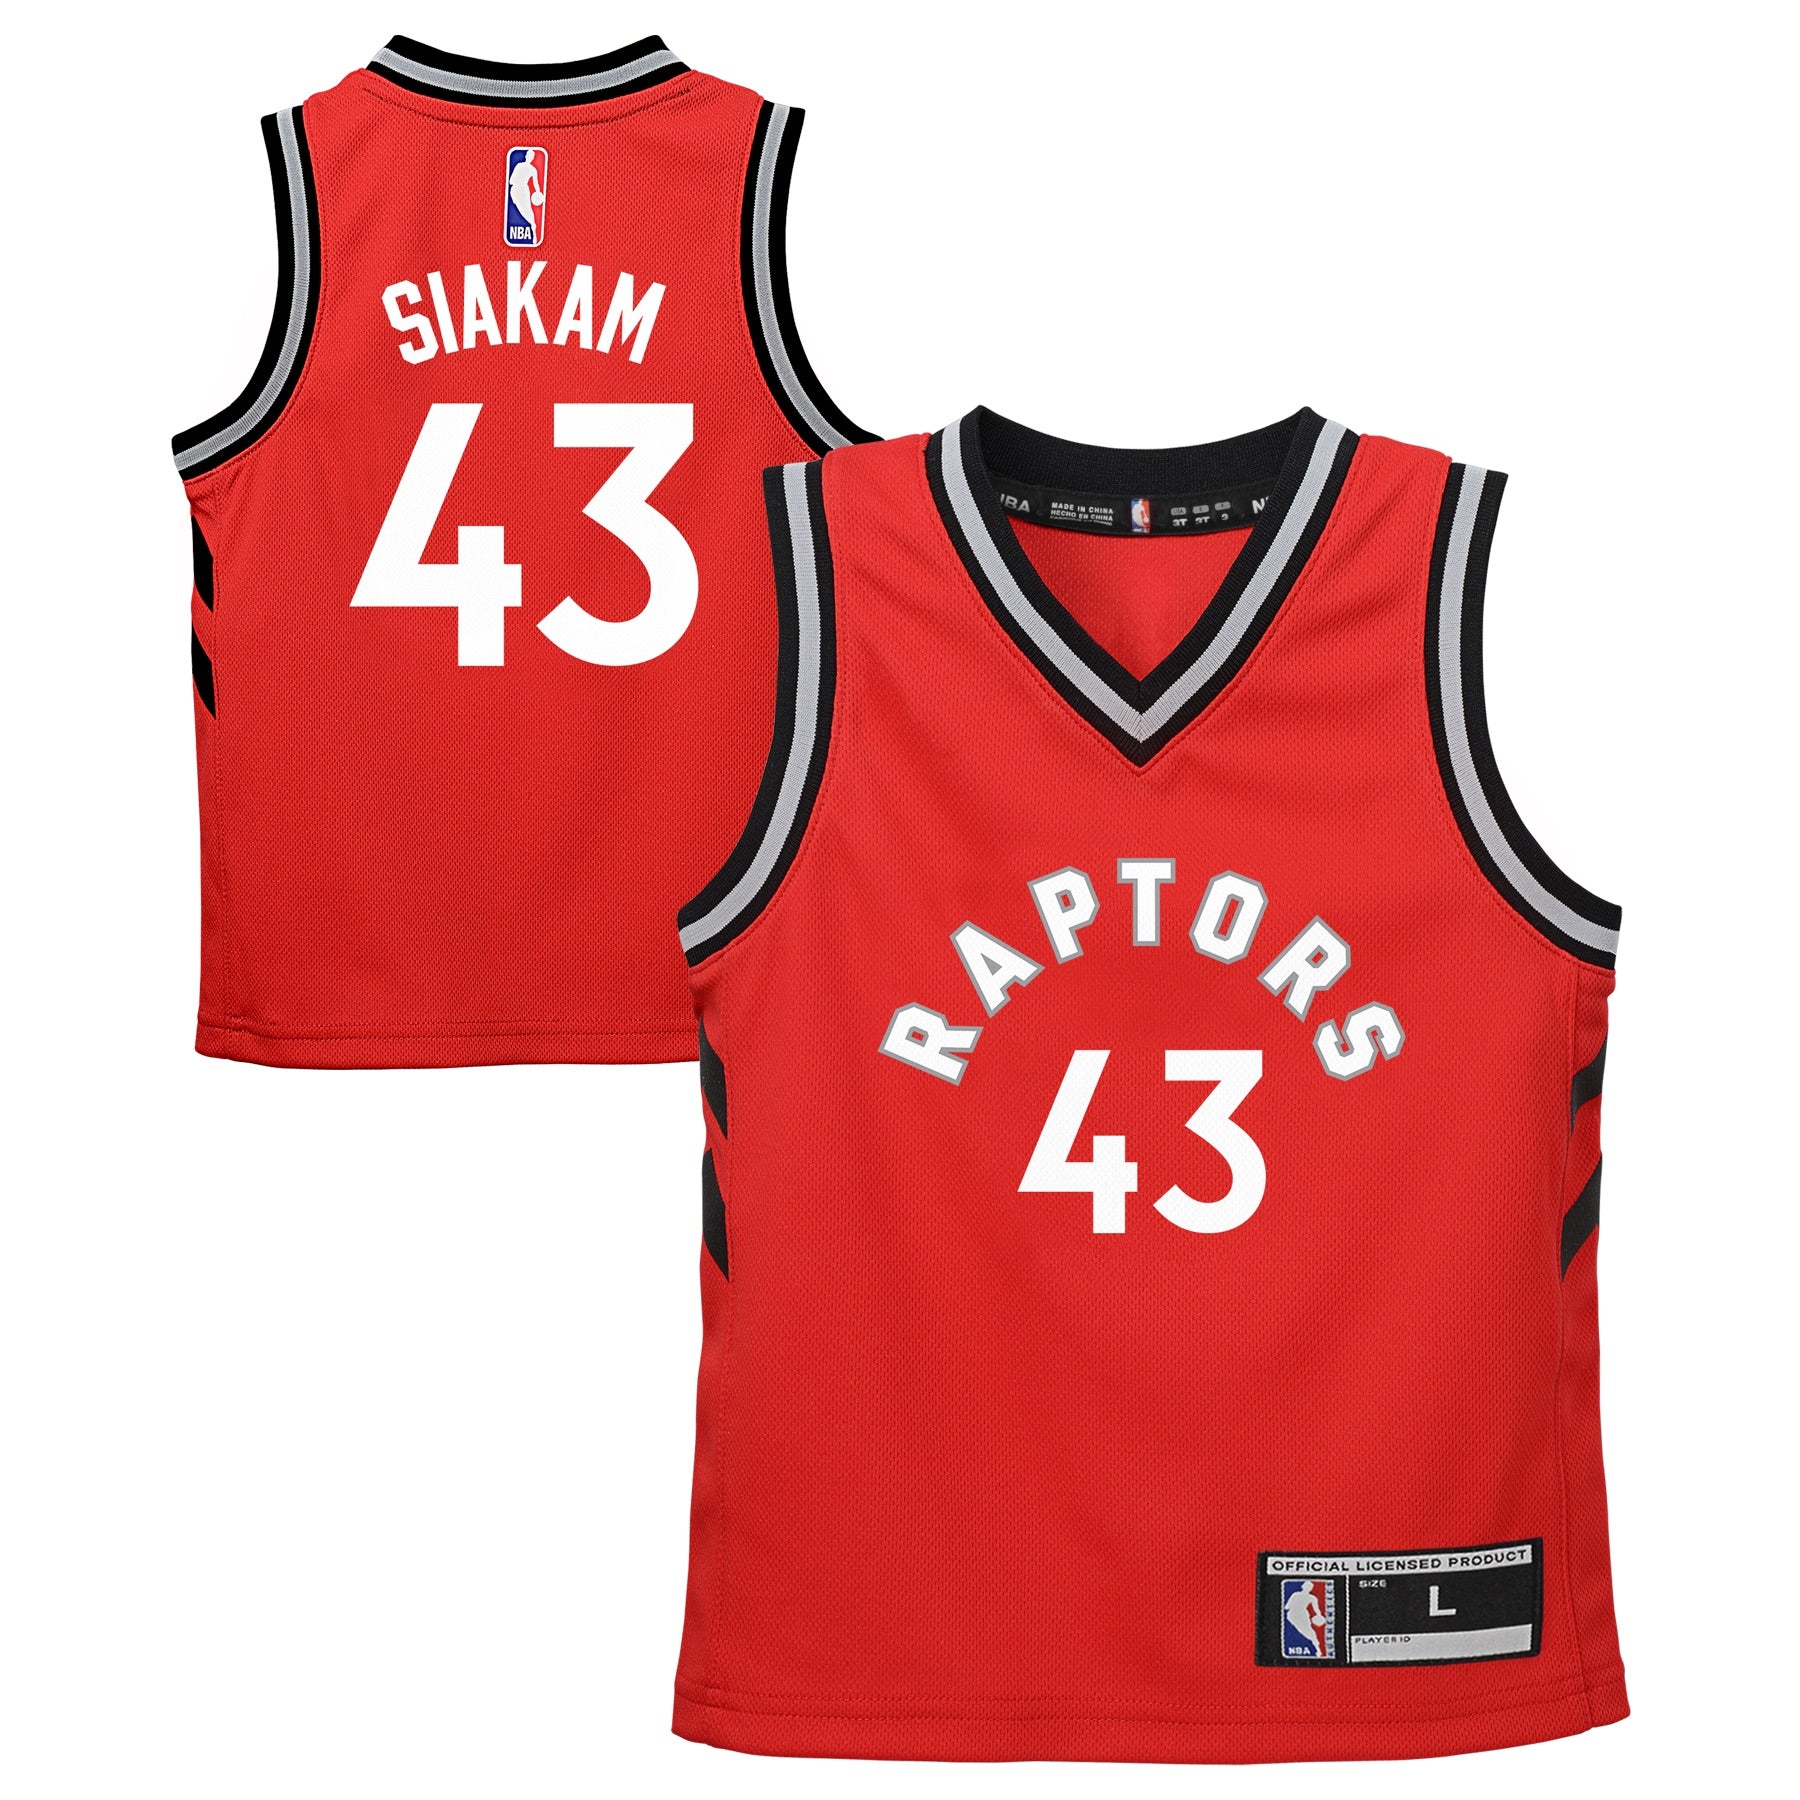 pascal siakam jersey number